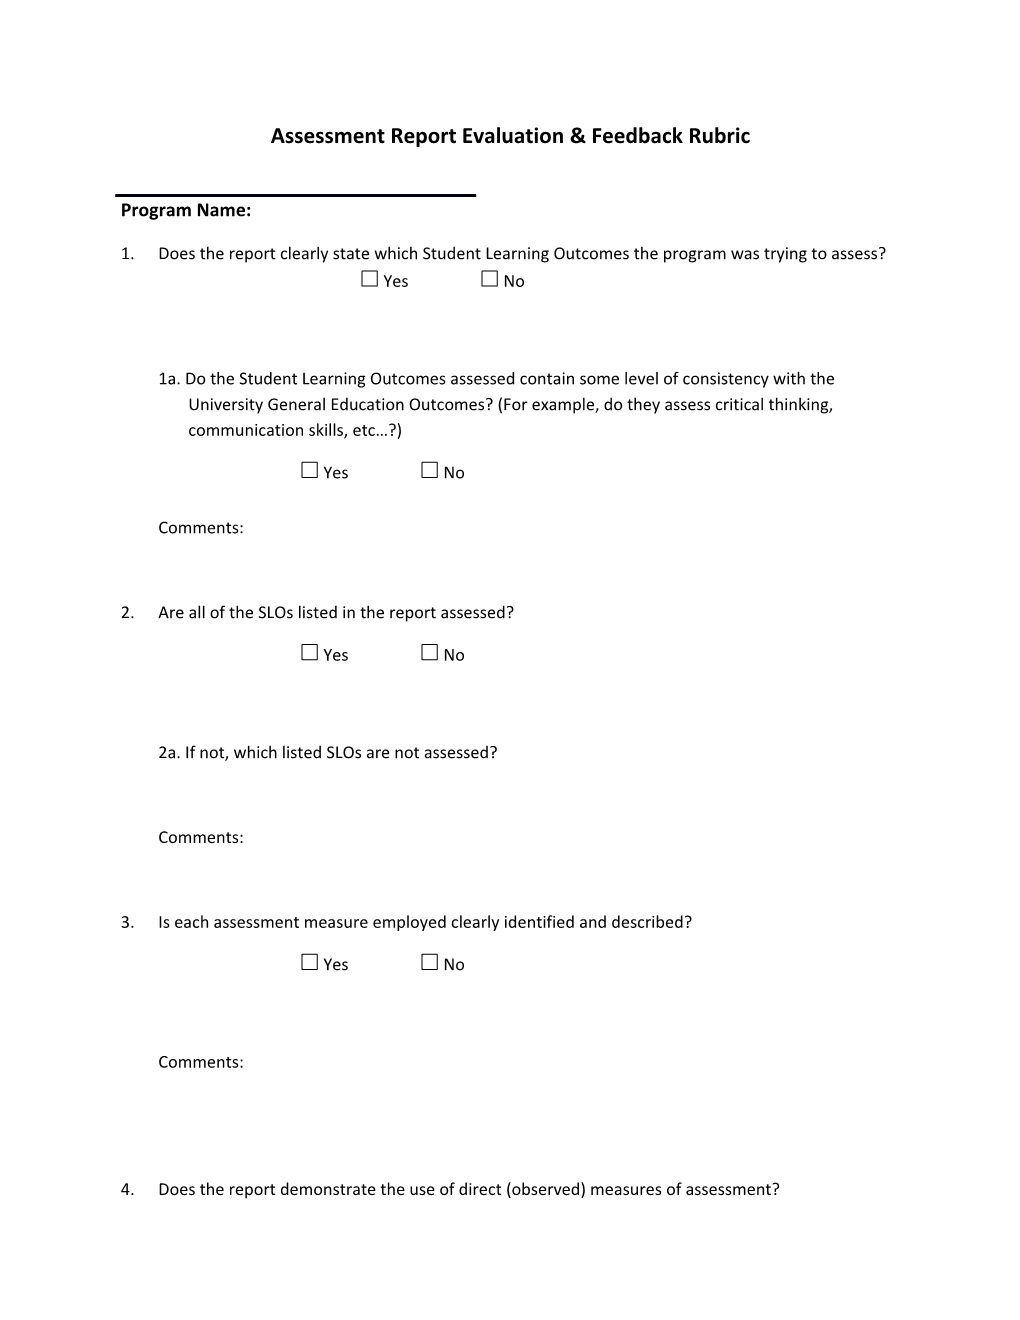 Assessment Report Evaluation & Feedback Rubric